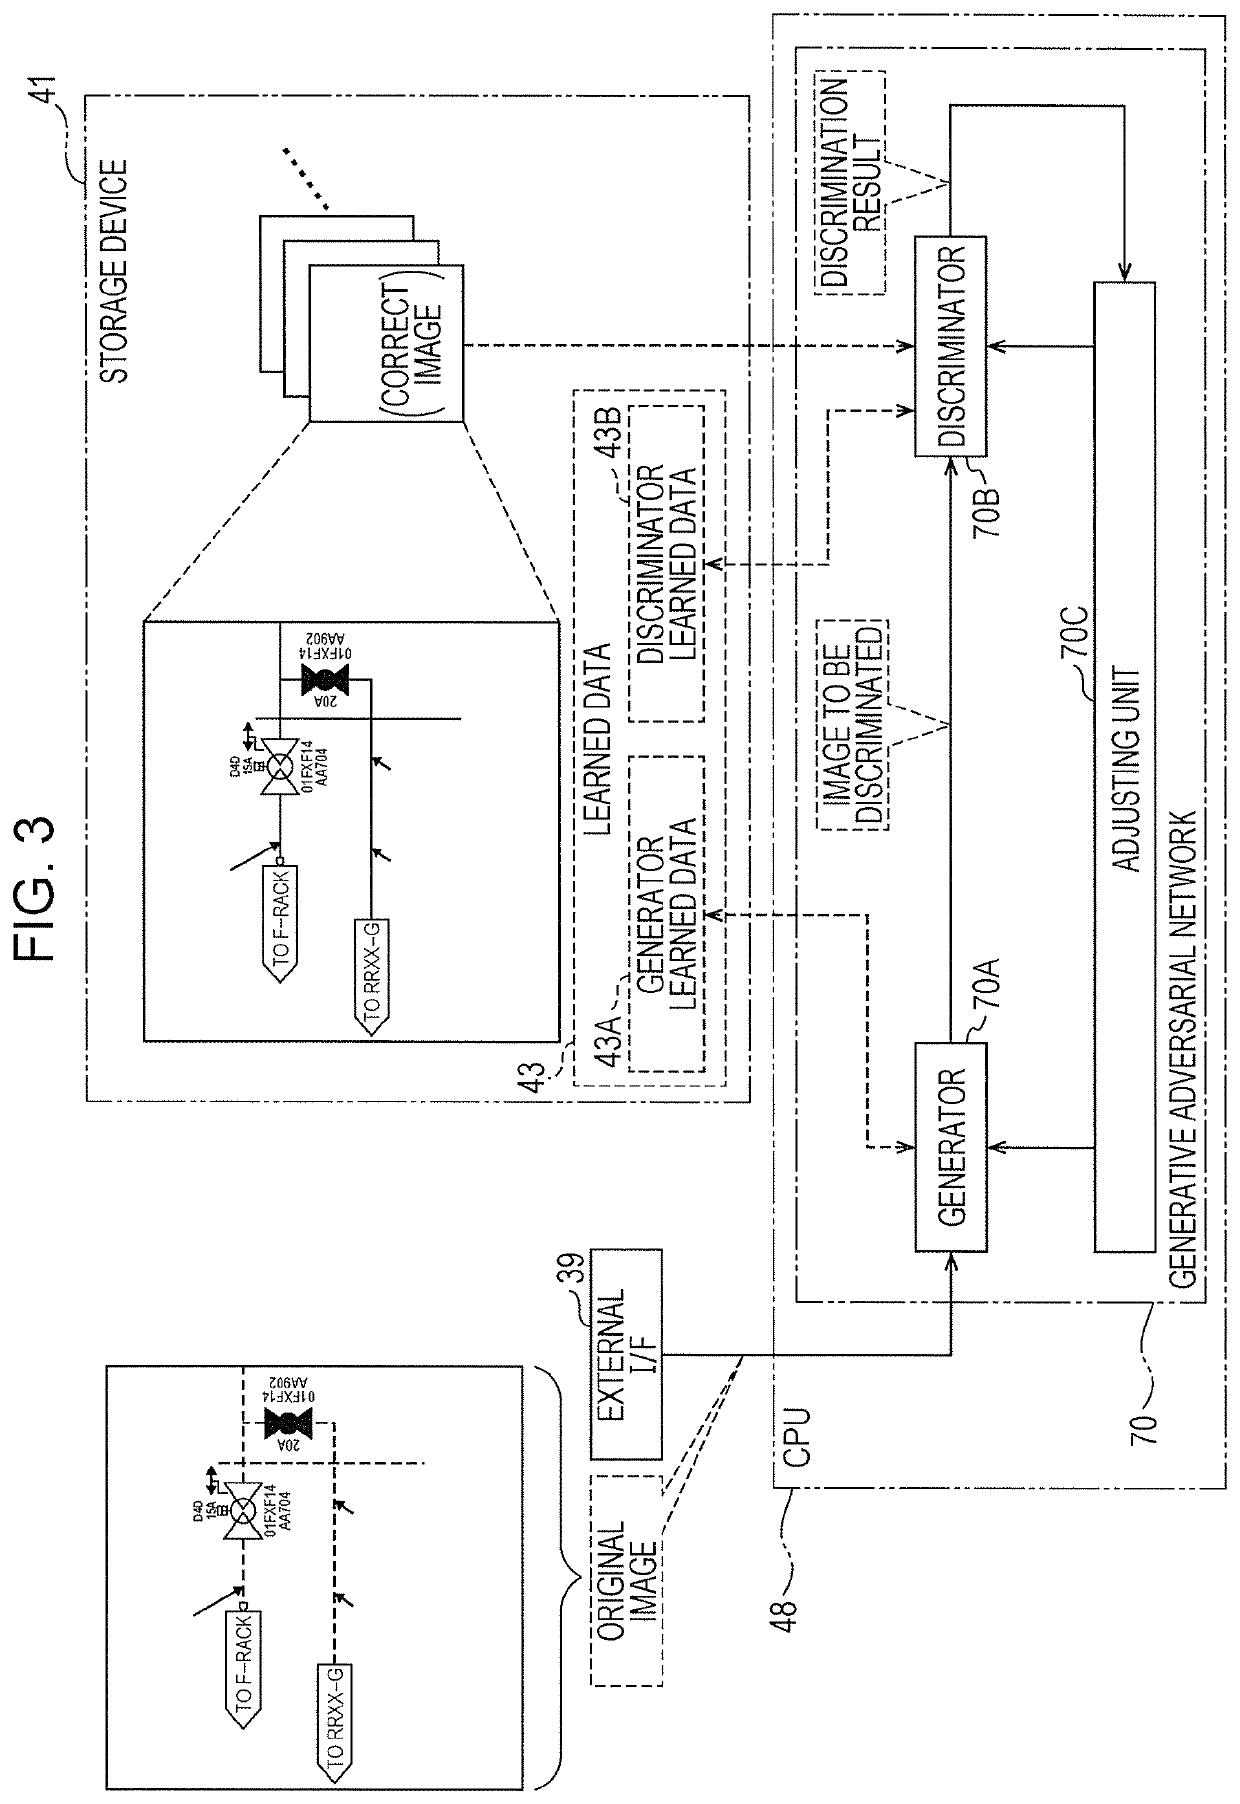 Image processing apparatus and non-transitory computer readable medium